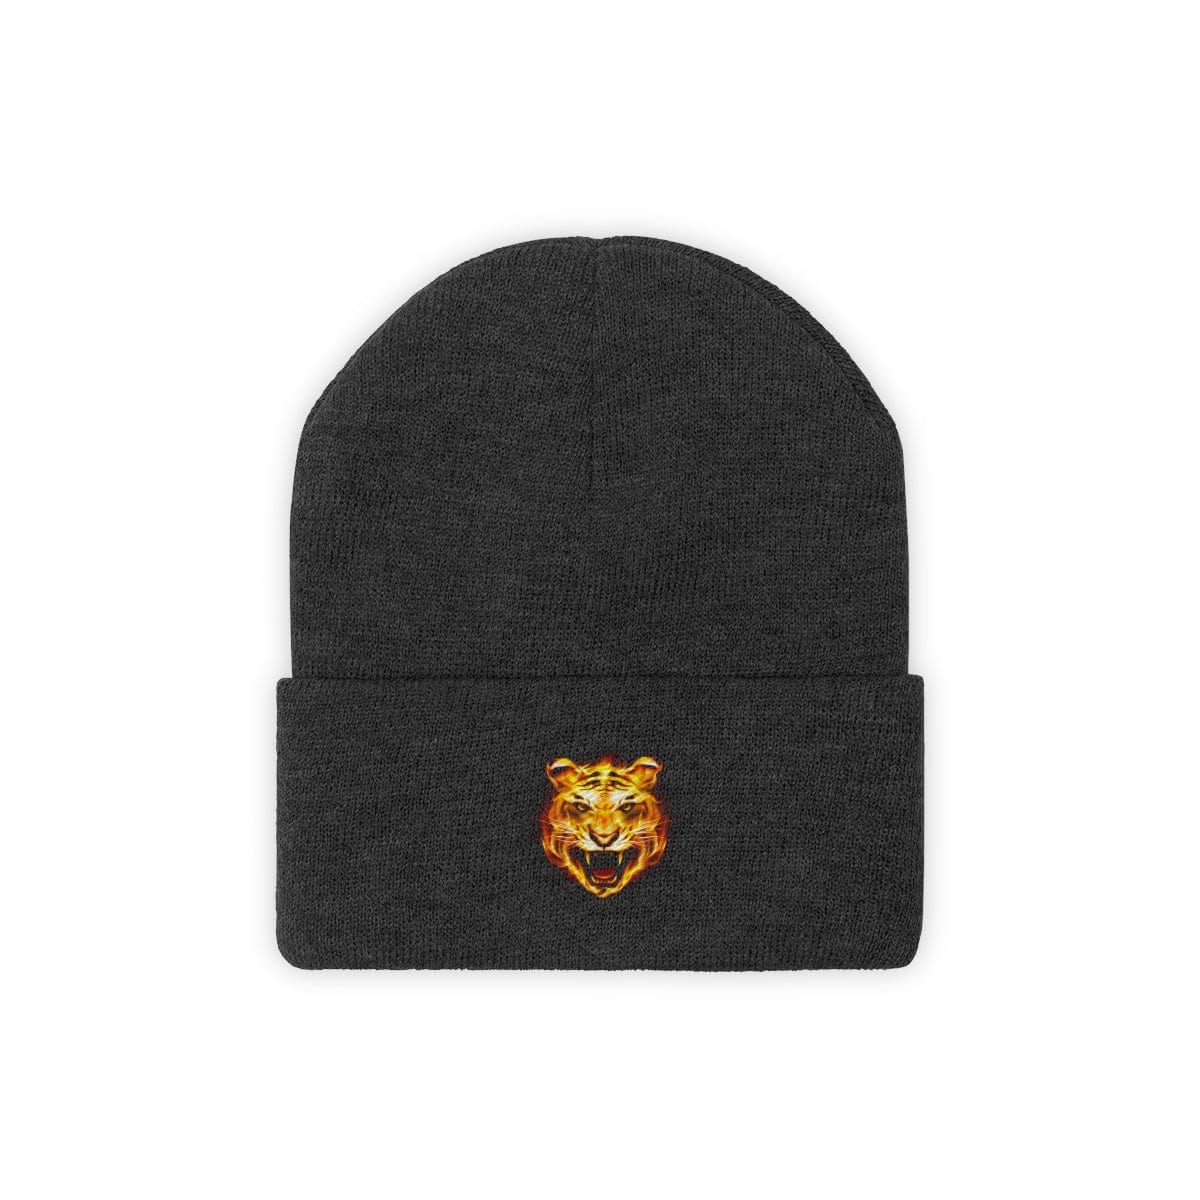 The Flaming Cosmo Tiger Black Knitted Beanie Hat